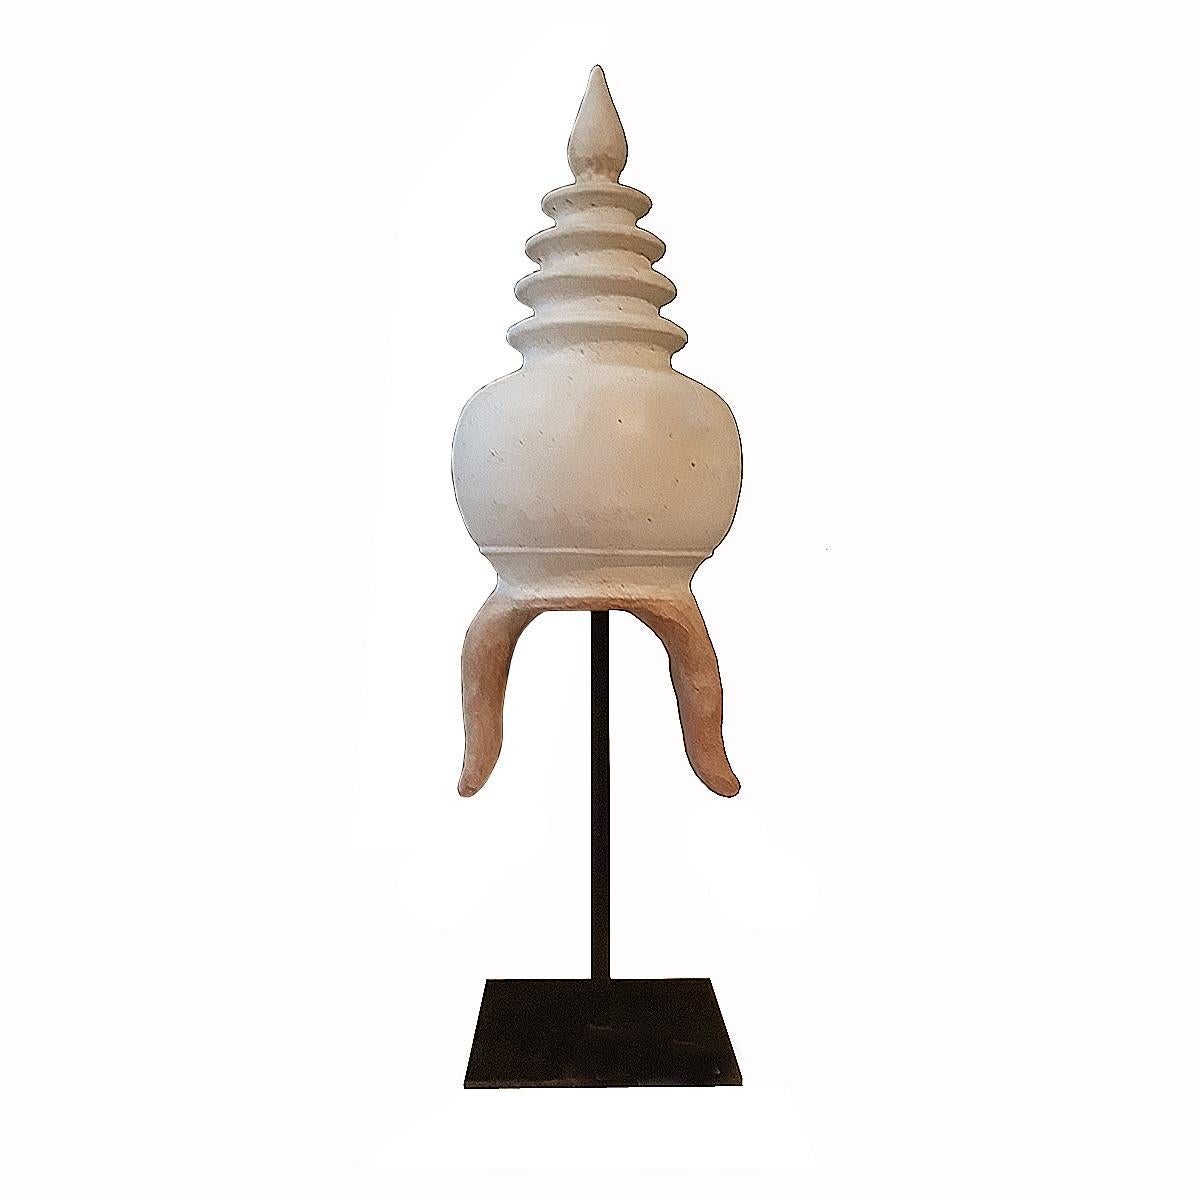 A Stupa architectural detail from Thailand, late 20th century, hand-crafted in rustic earthenware. 

The Stupa shape represents one of the most ancient and sacred Buddhist architectural traditions, commonly seen in temples and homes. Mounted on a